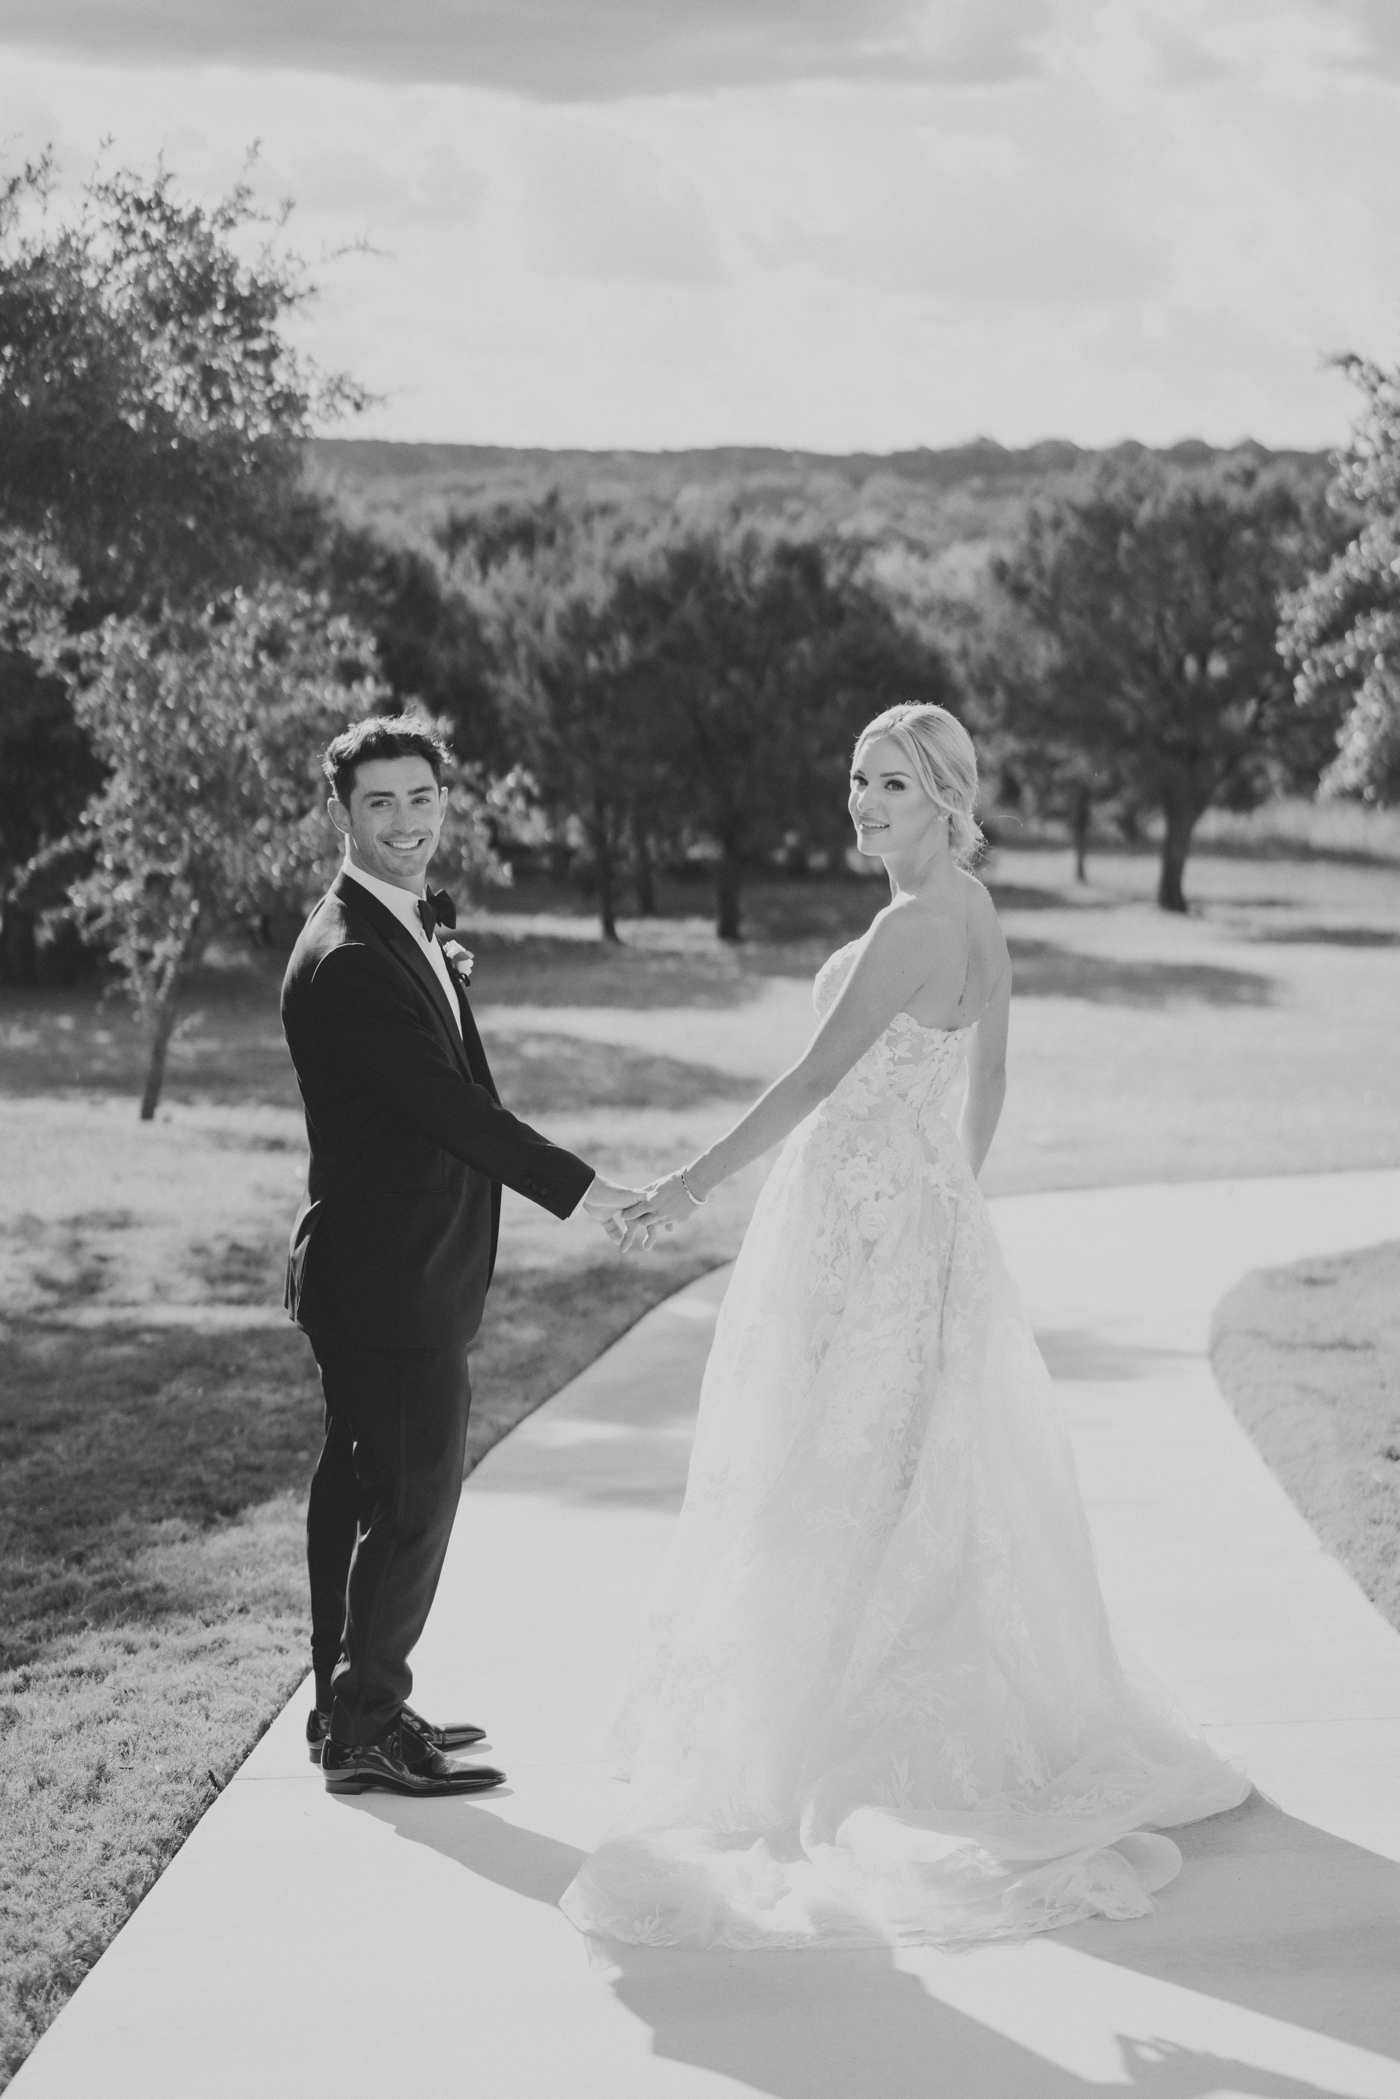 Black and white wedding day portrait at The Arlo in Austin, Texas